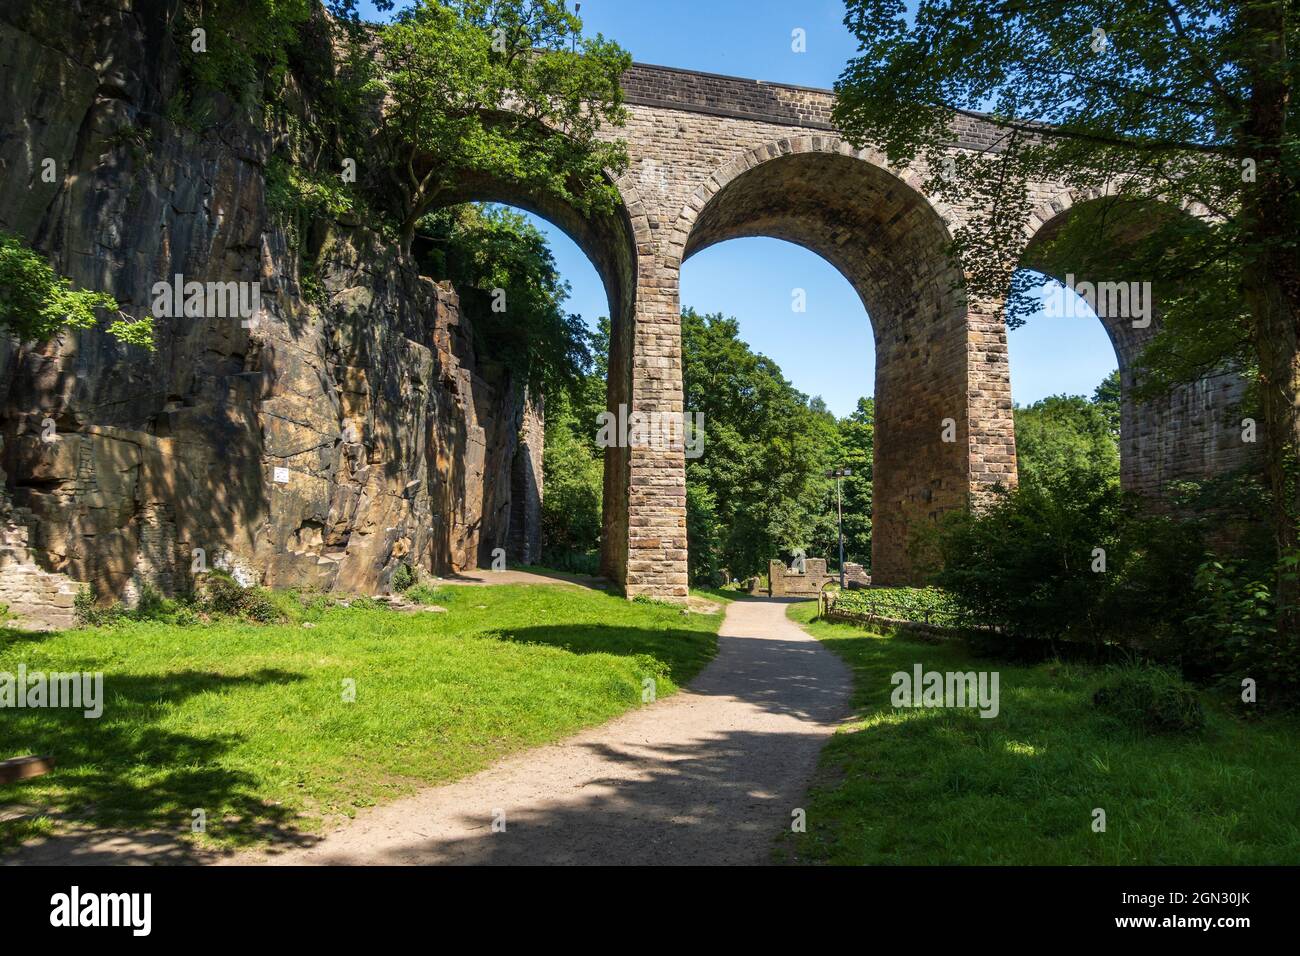 The Torr Vale Viaduct taking the Union Road over the River Goyt at Torr Vale, New Mills in Derbyshire, England, Uk Stock Photo